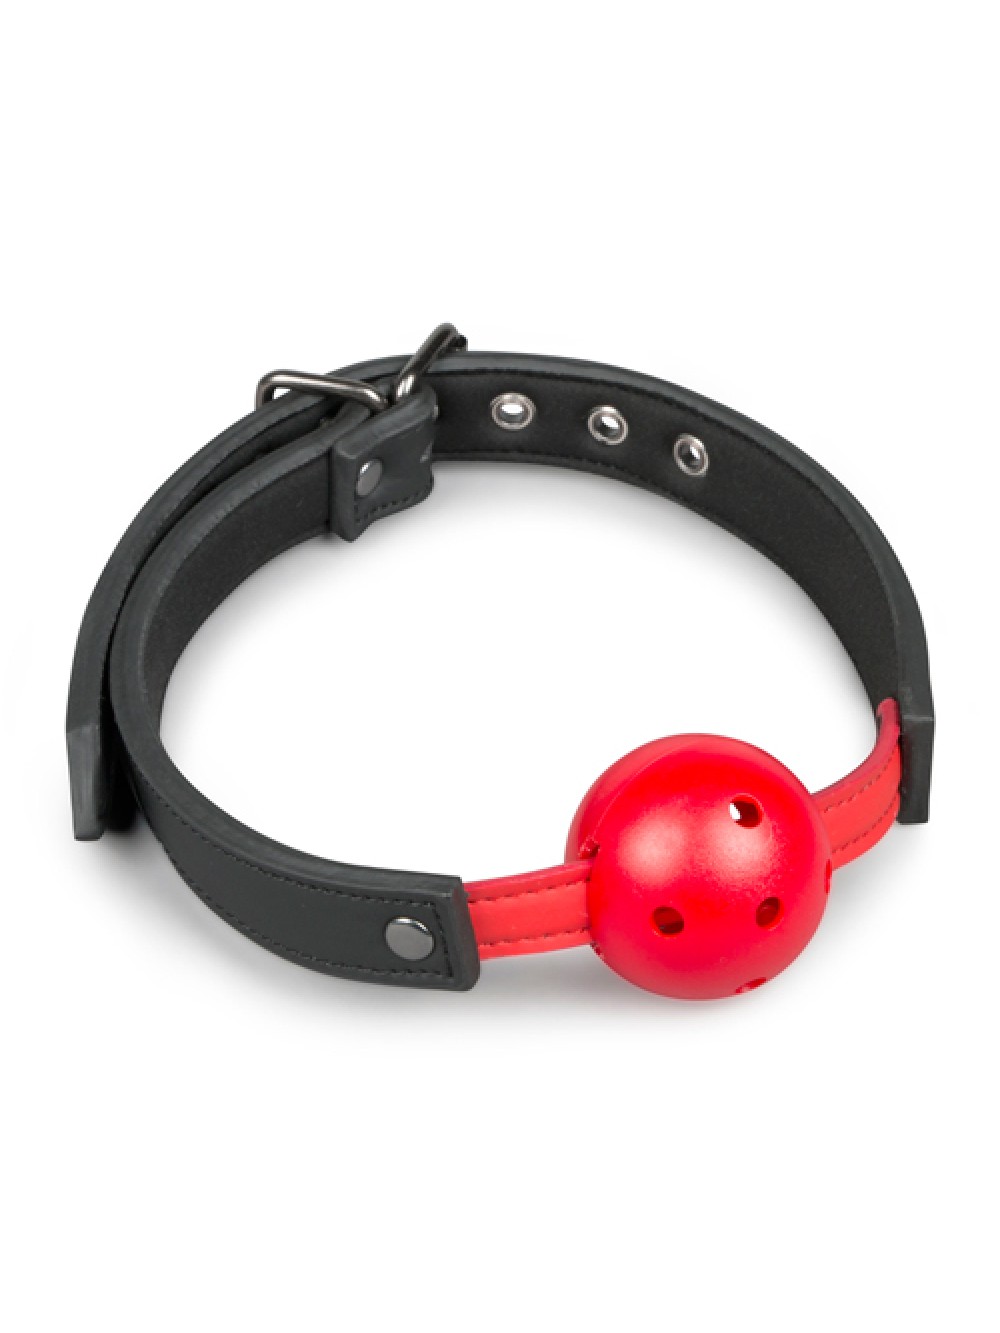 Ball Gag With PVC Ball - Red